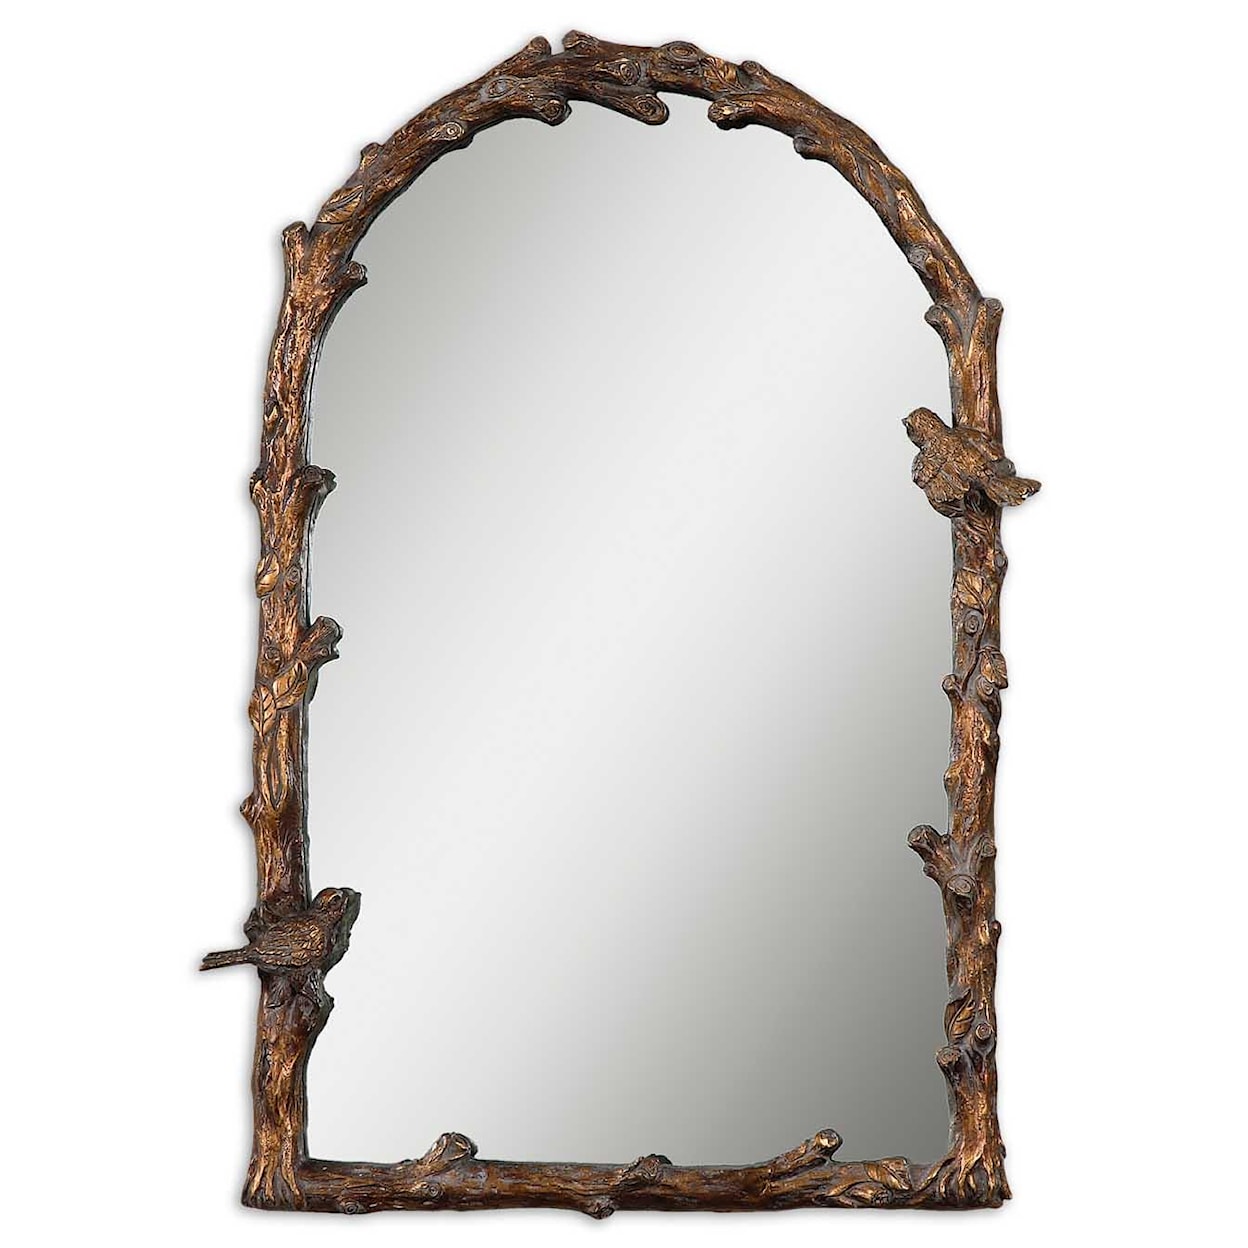 Uttermost Arched Mirrors Paza Arch